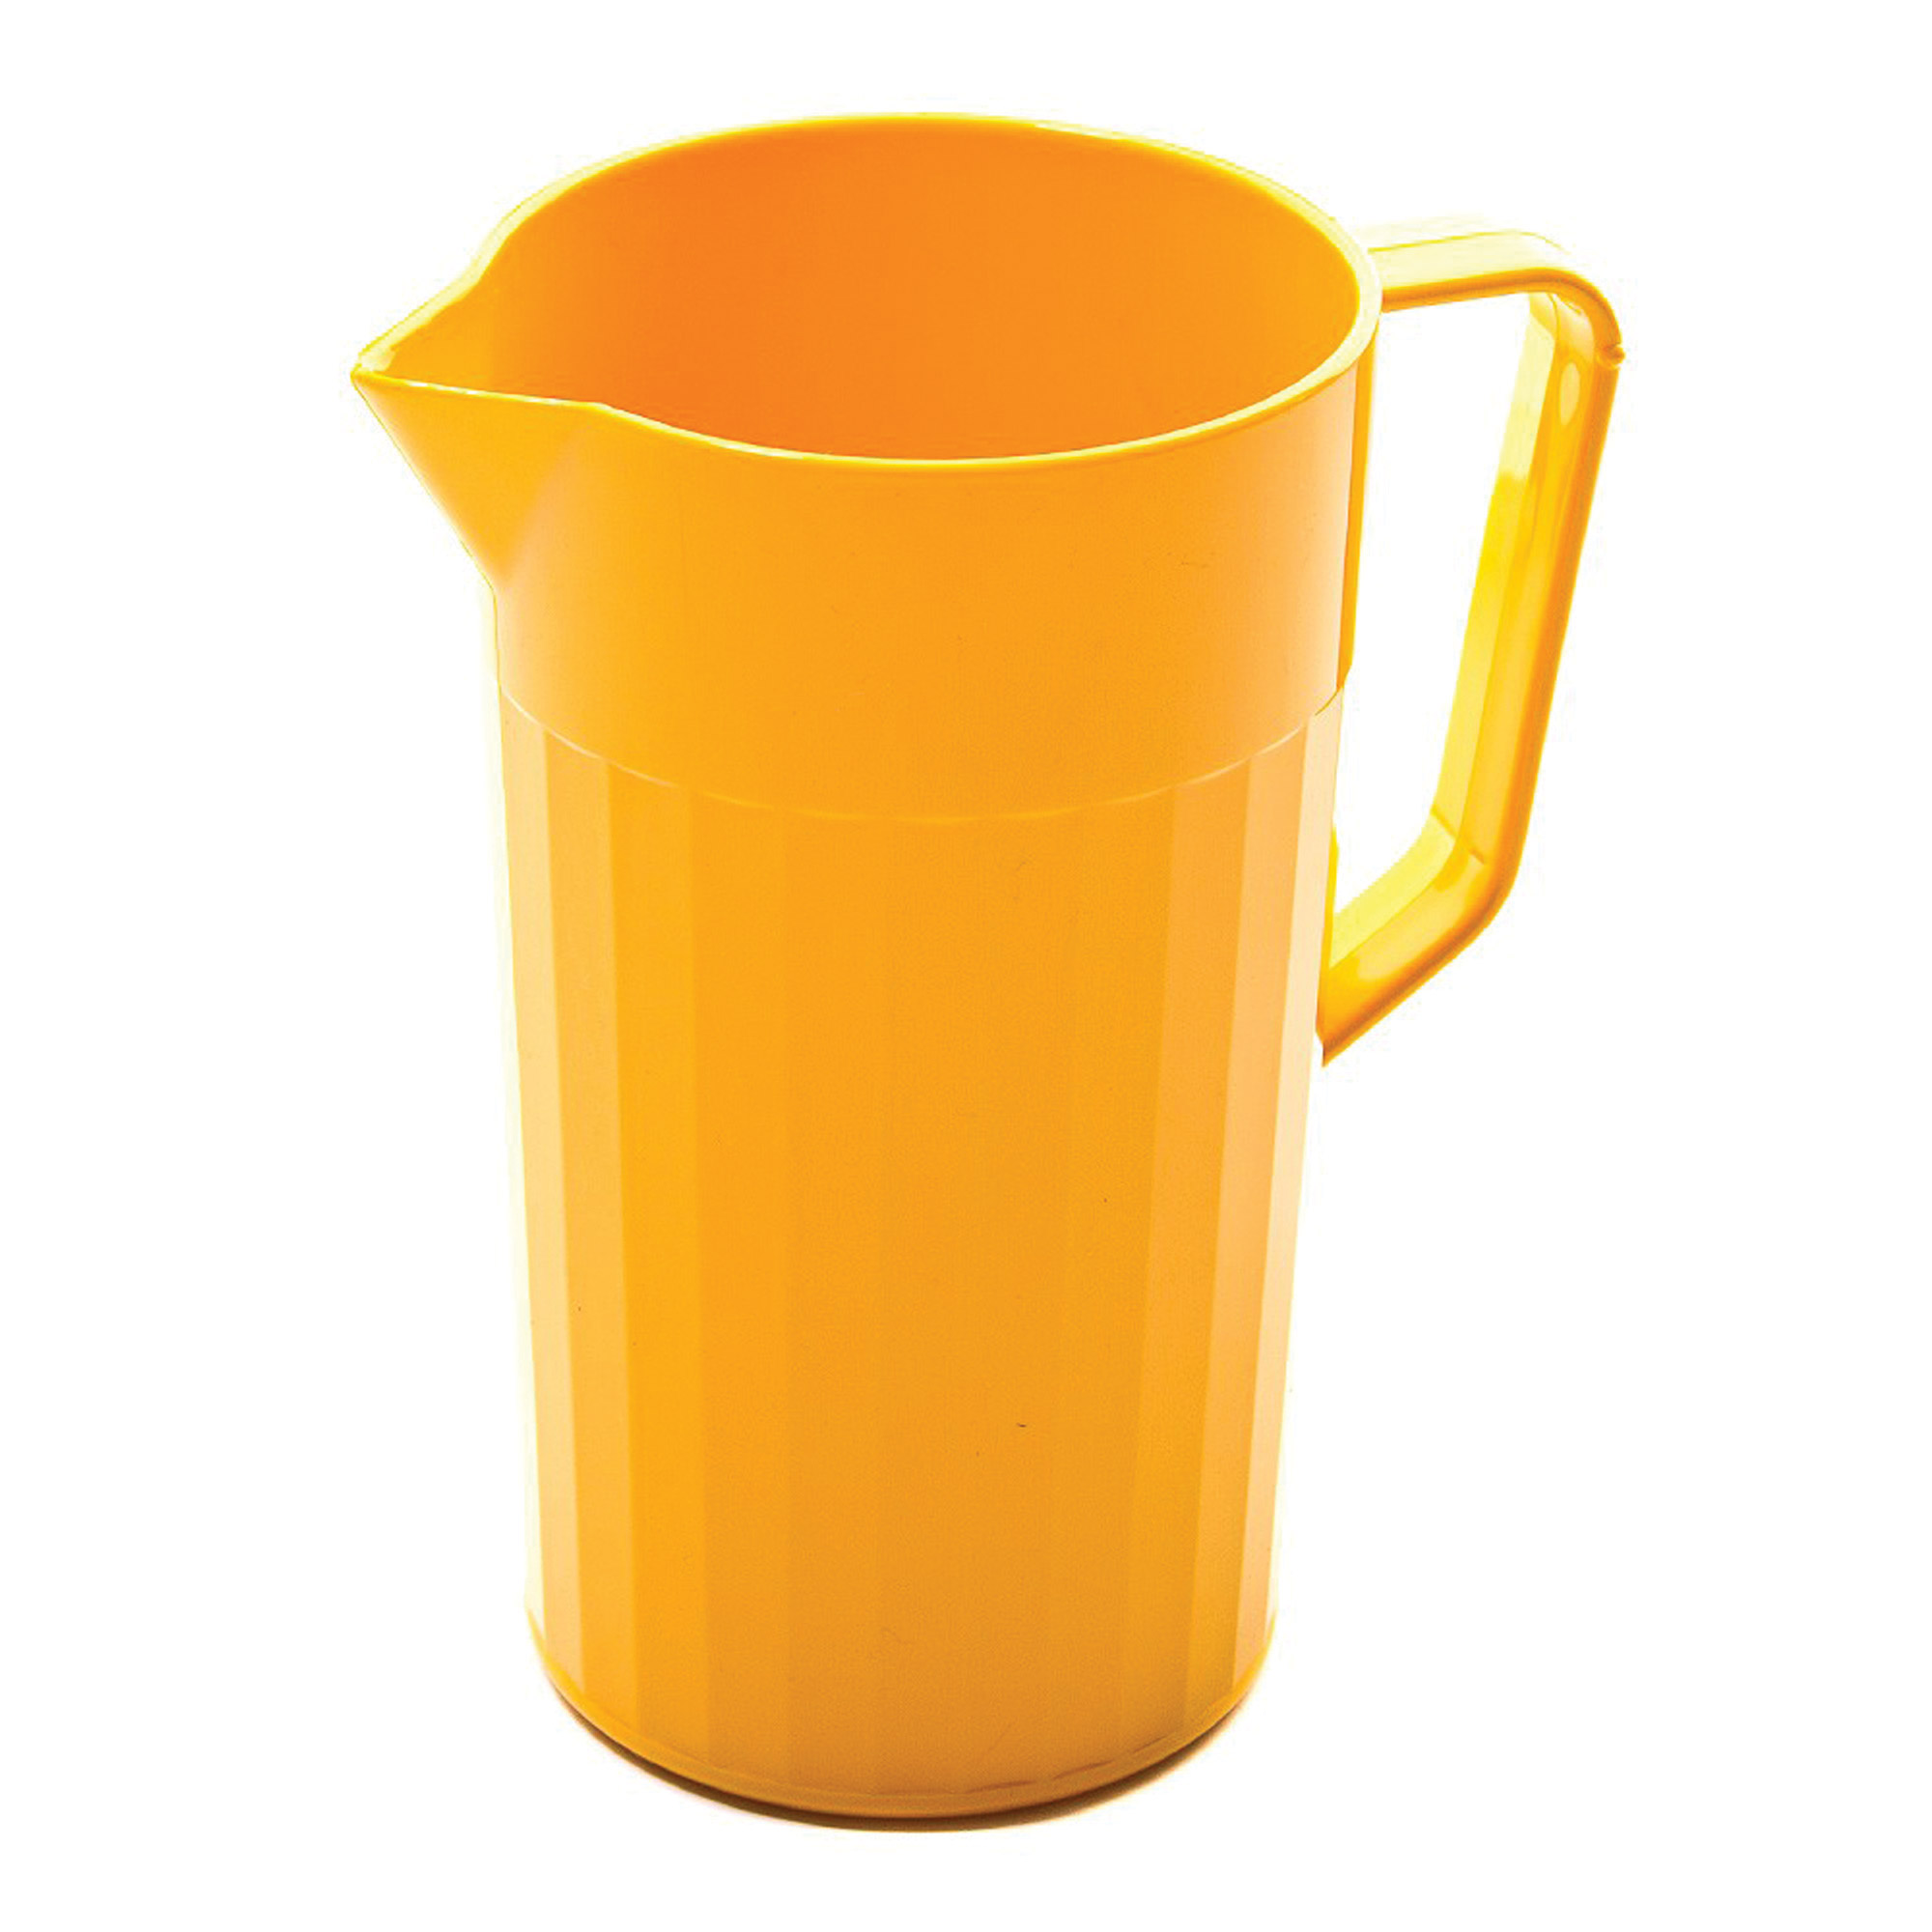 1.1 Litre Polycarbonate Jug YELLOW (microwave and dishwasher safe) - Each